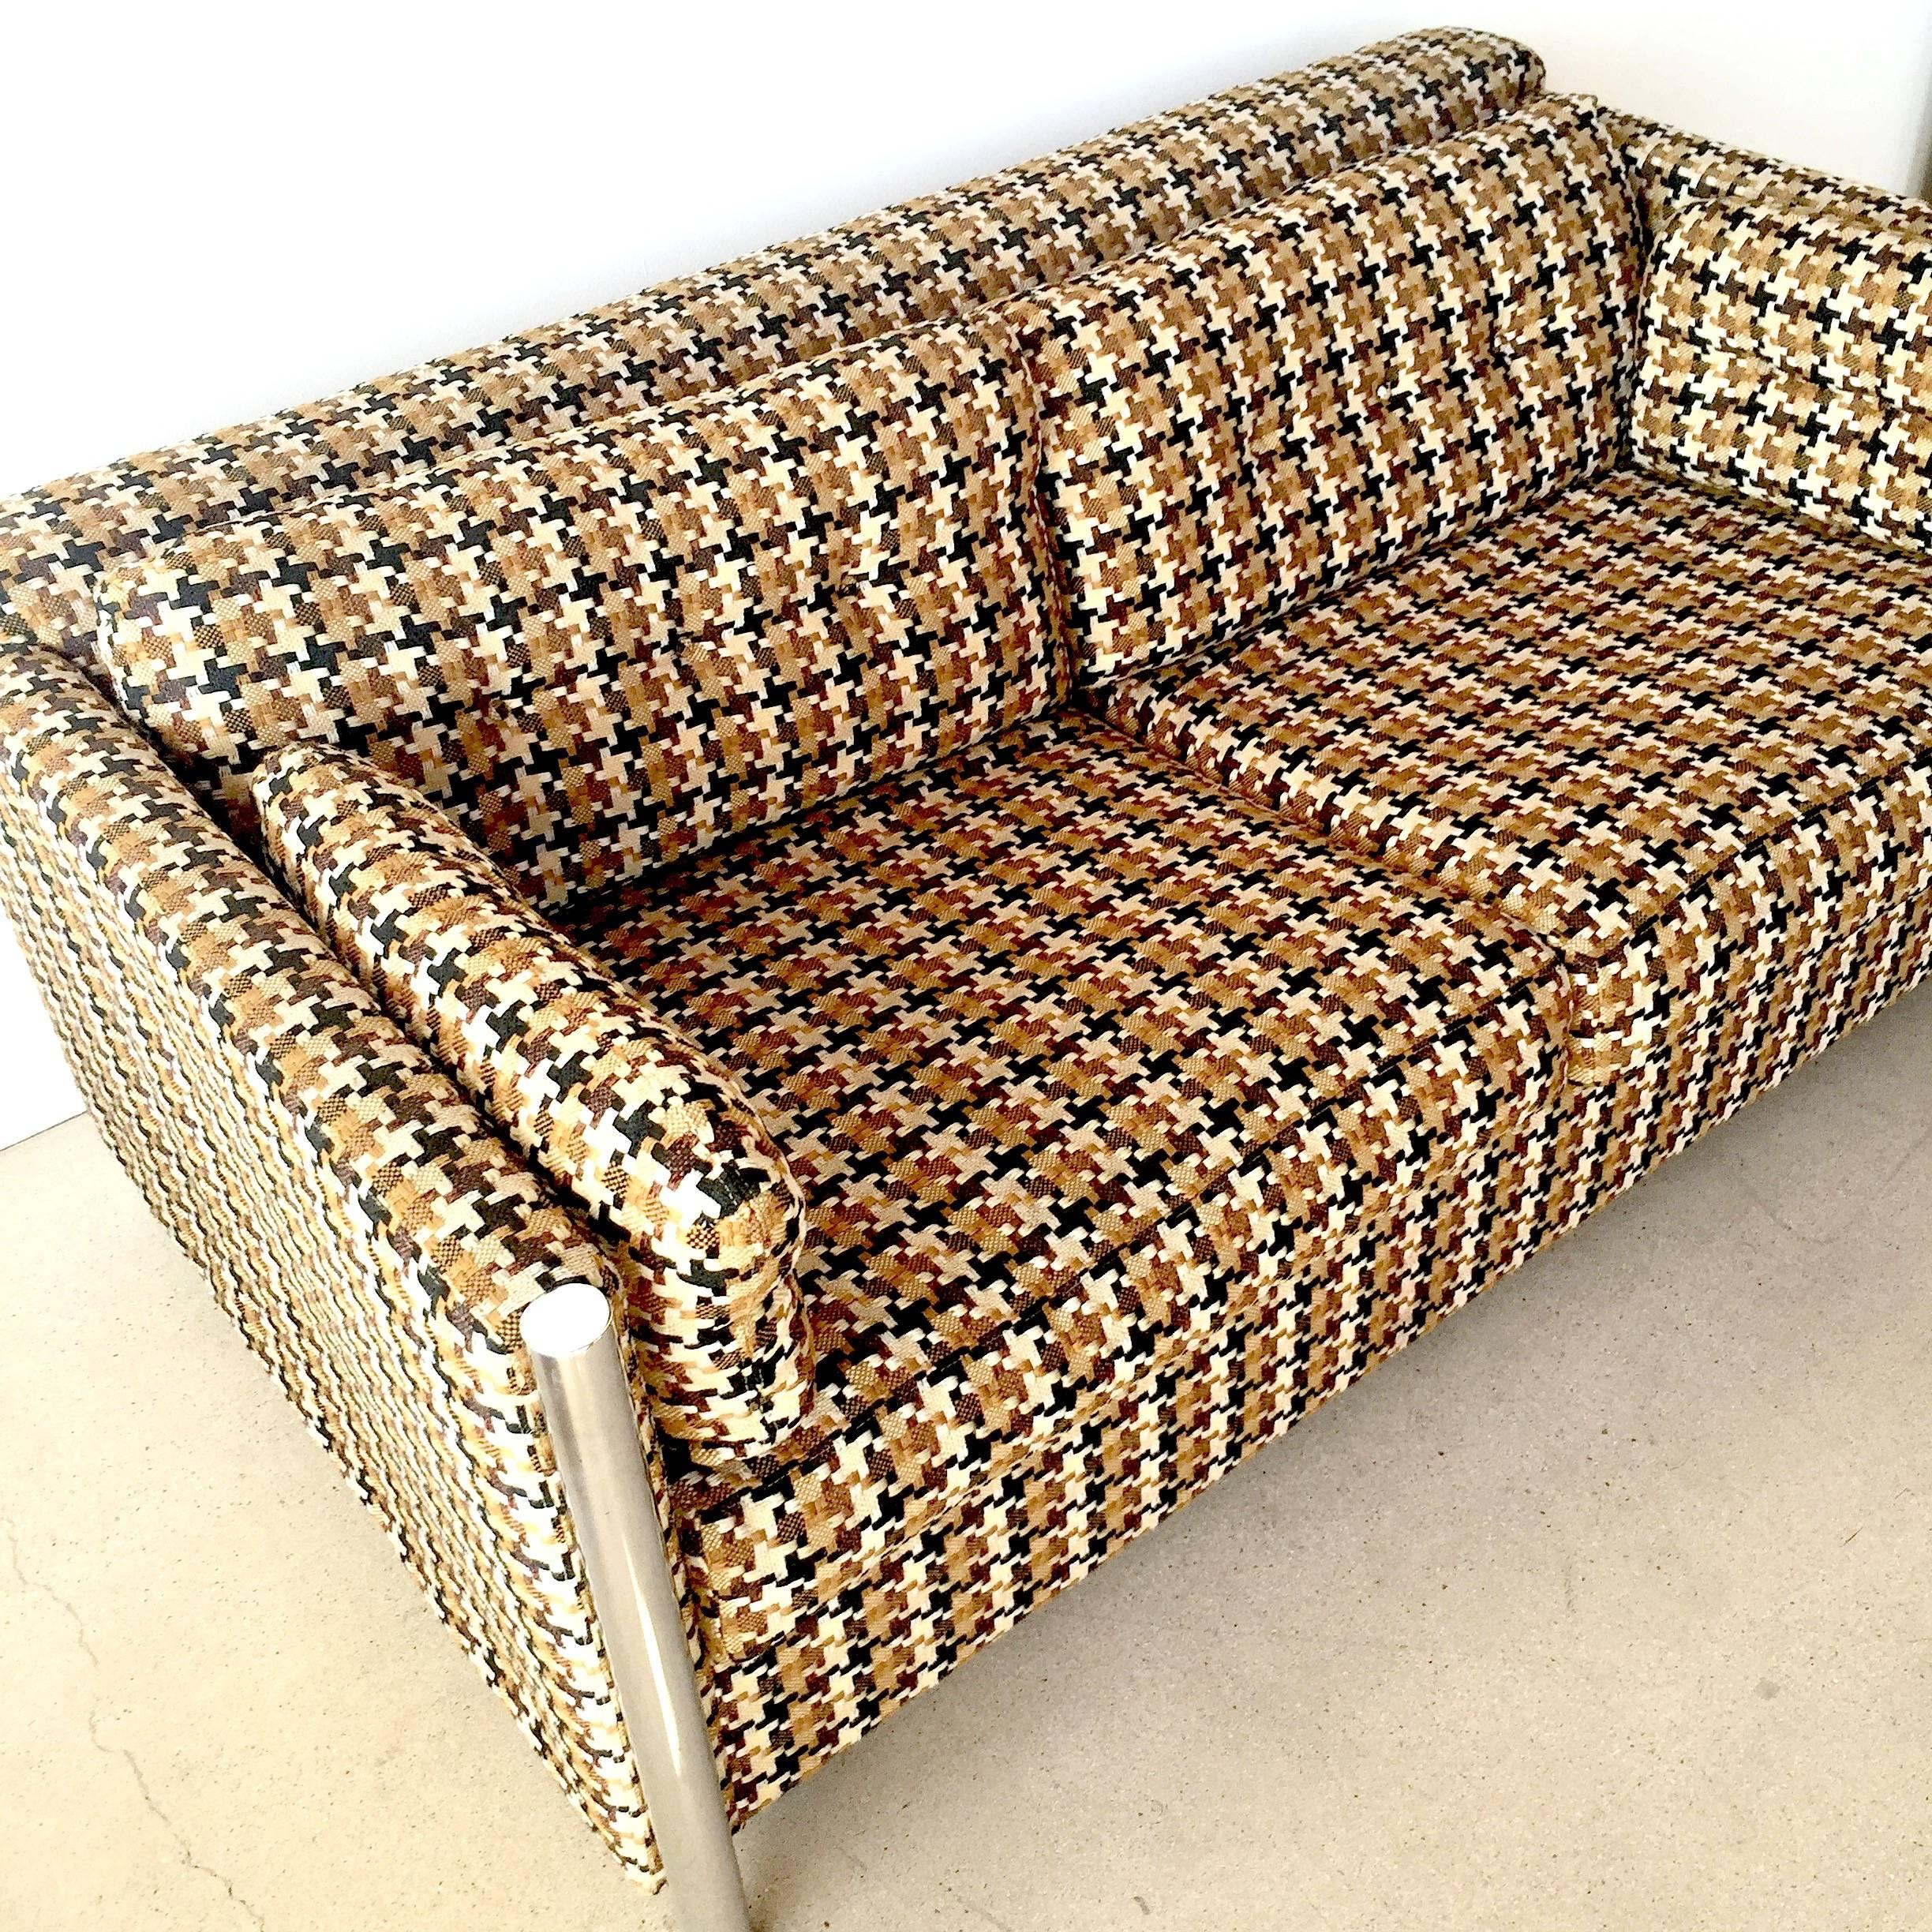 Fabulous 1970s retro sofa bed from Selig showcase. Cushions come off and bed pulls out with a full size mattress. There is also a packet of extra fabric included for arm covers or headrests. Mint condition houndstooth fabric. Chrome leg accents.